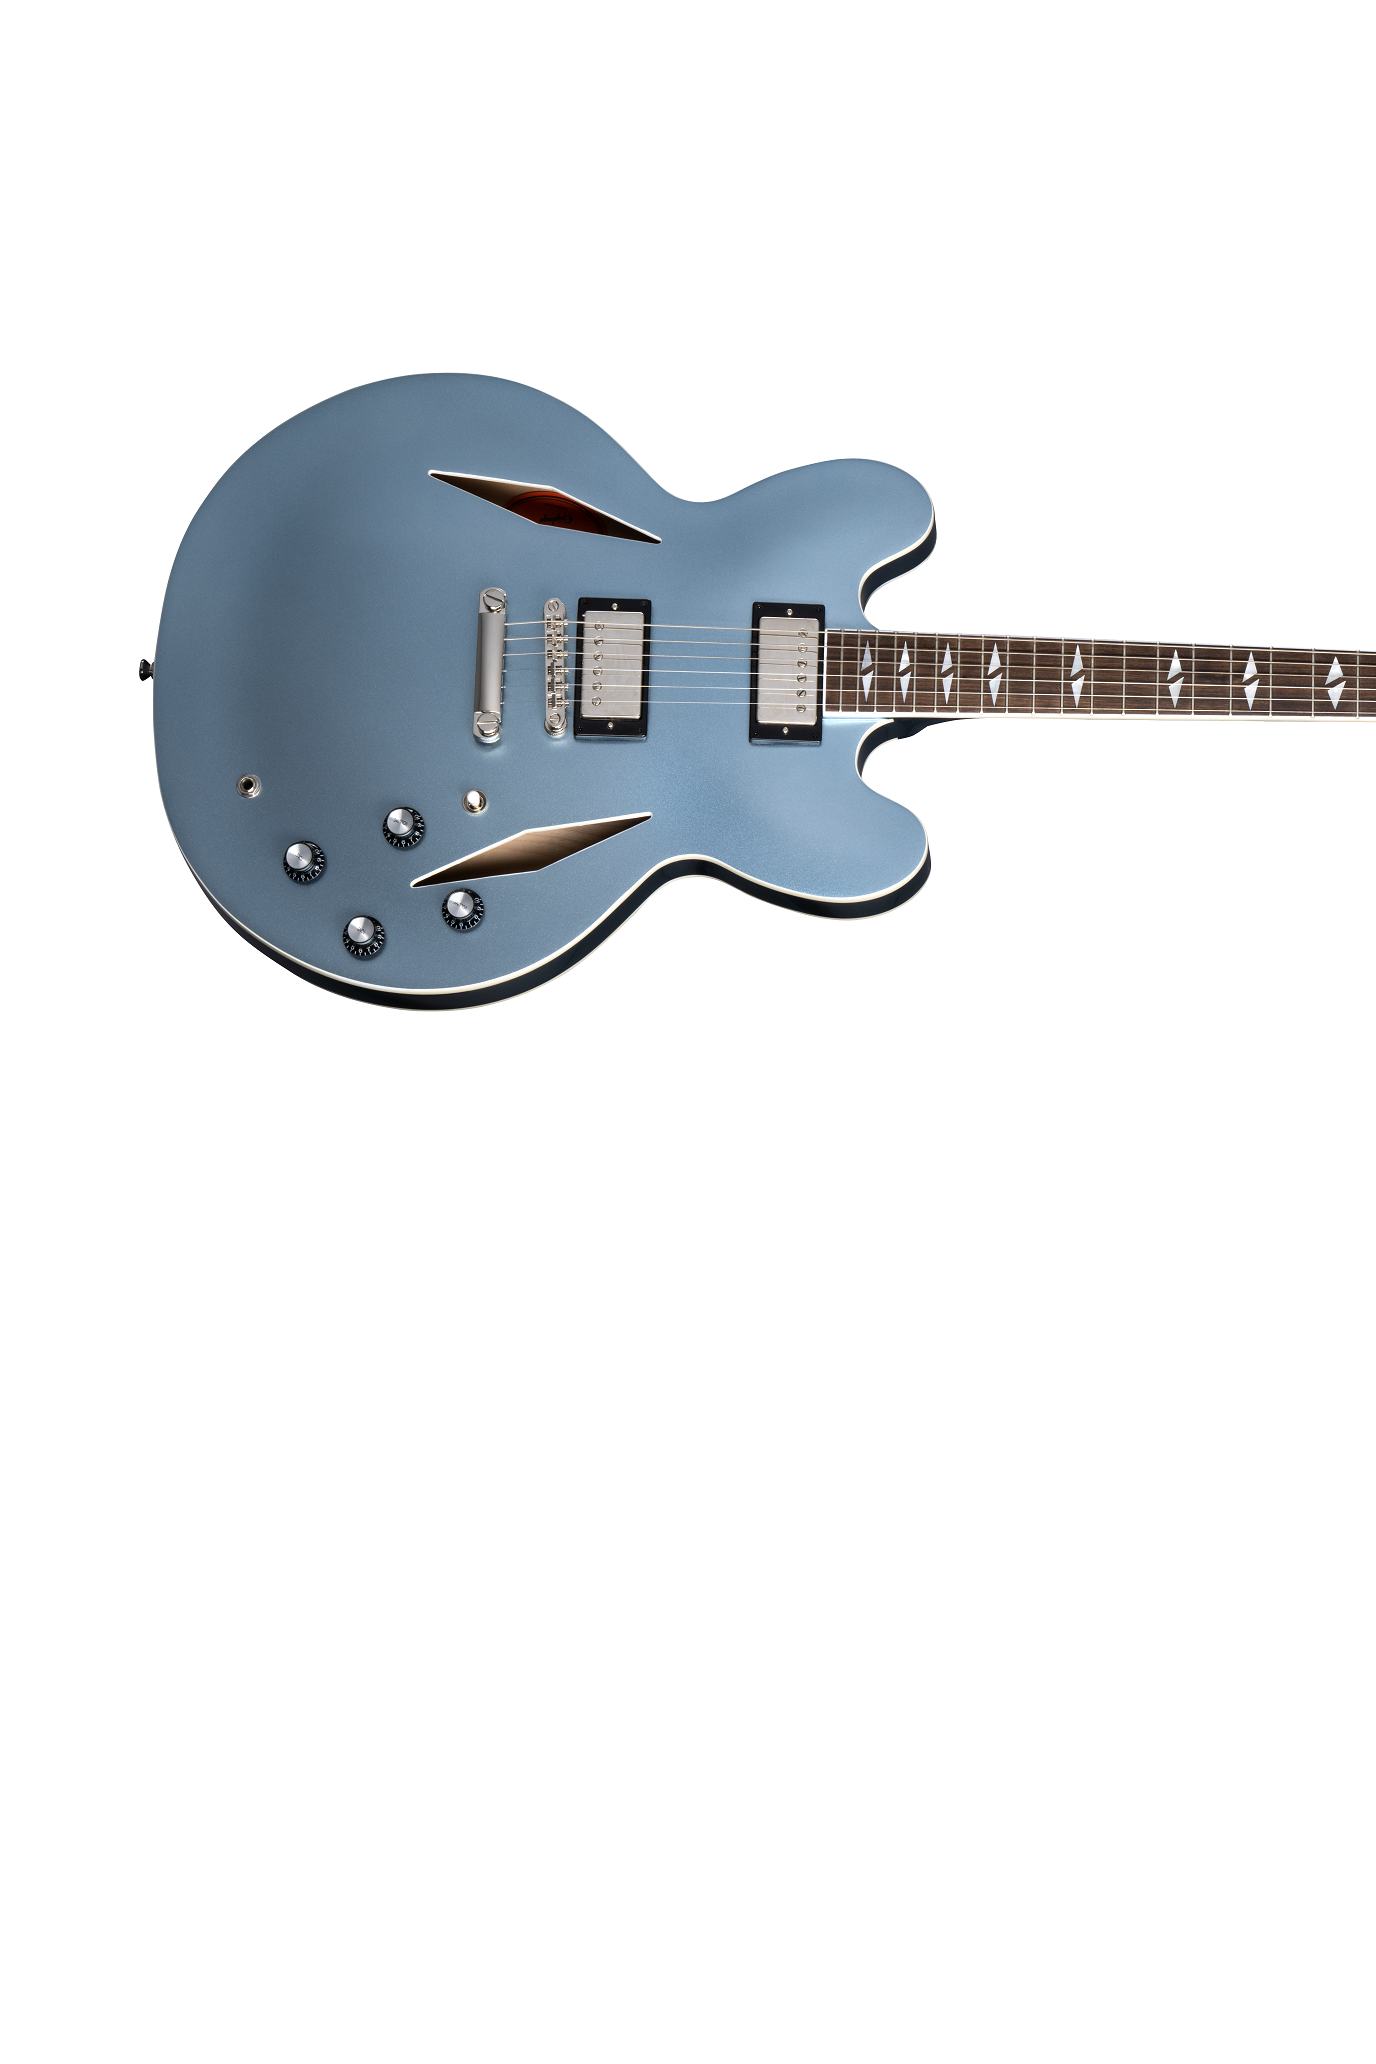 Epiphone Inspired by Gibson Dave Grohl DG-335 w/ Hard Shell Case EIGCDG335PENH Pelham Blue